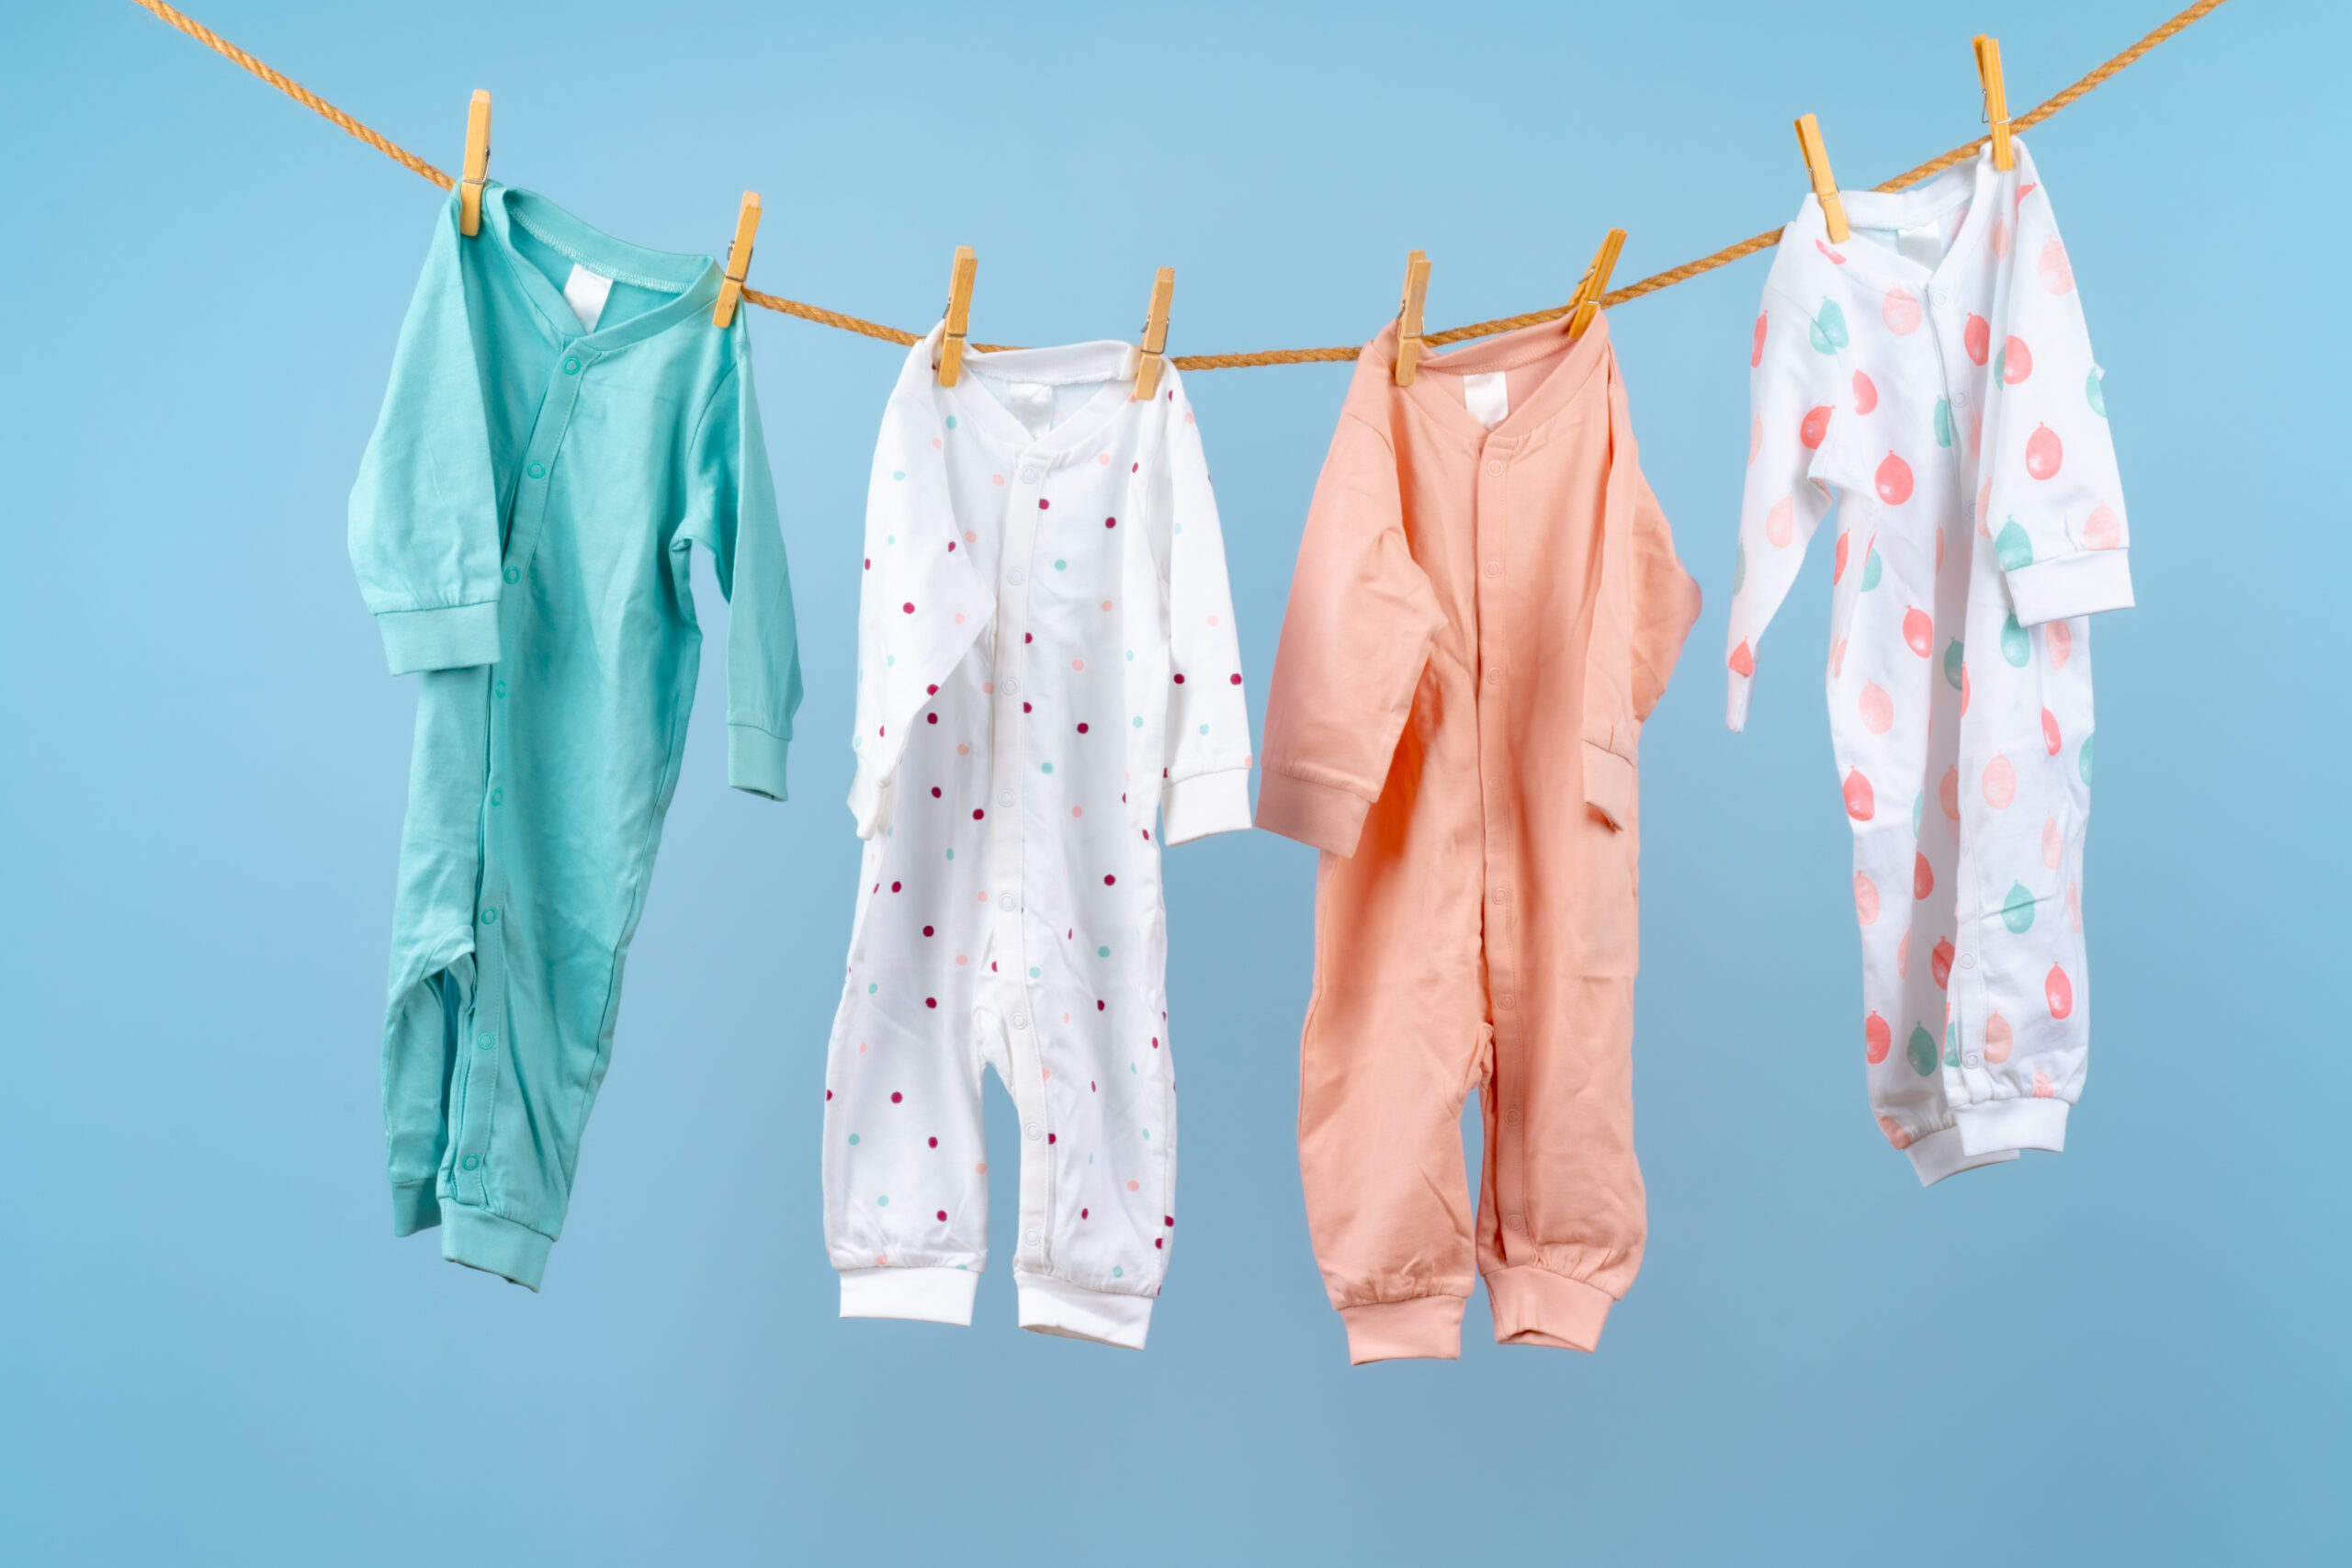 Cute toddler colorful clothing hang on a rope